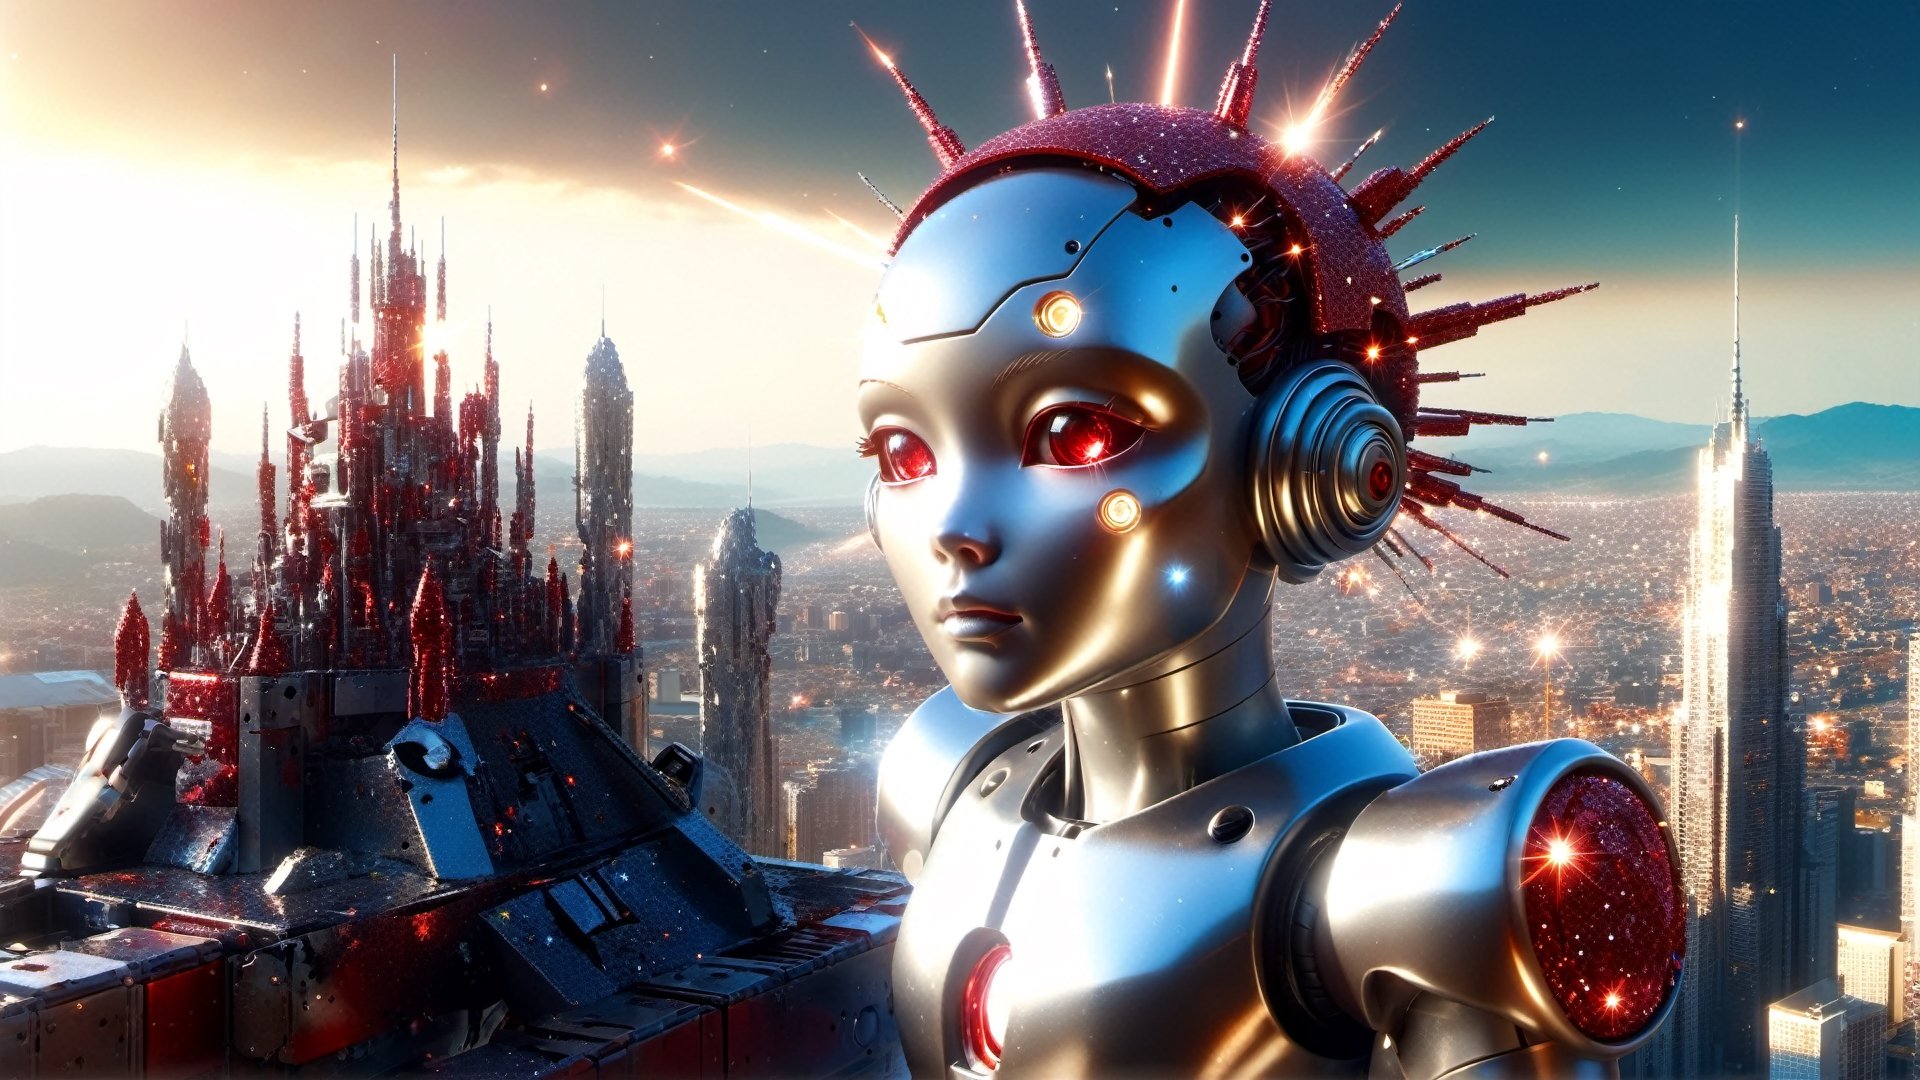 4k, masterpiece, ((space castle)), (trendwhore style:1.4), ((abstract cyborg babies)), head and body, stainless steel head, mecha pieces, robot parts, shattered reality, ((bursting light rays), exploding star rays,  red theme. cityscape background, artint, SFW, ,night city,DonMW15pXL,glitter,shiny,itacstl